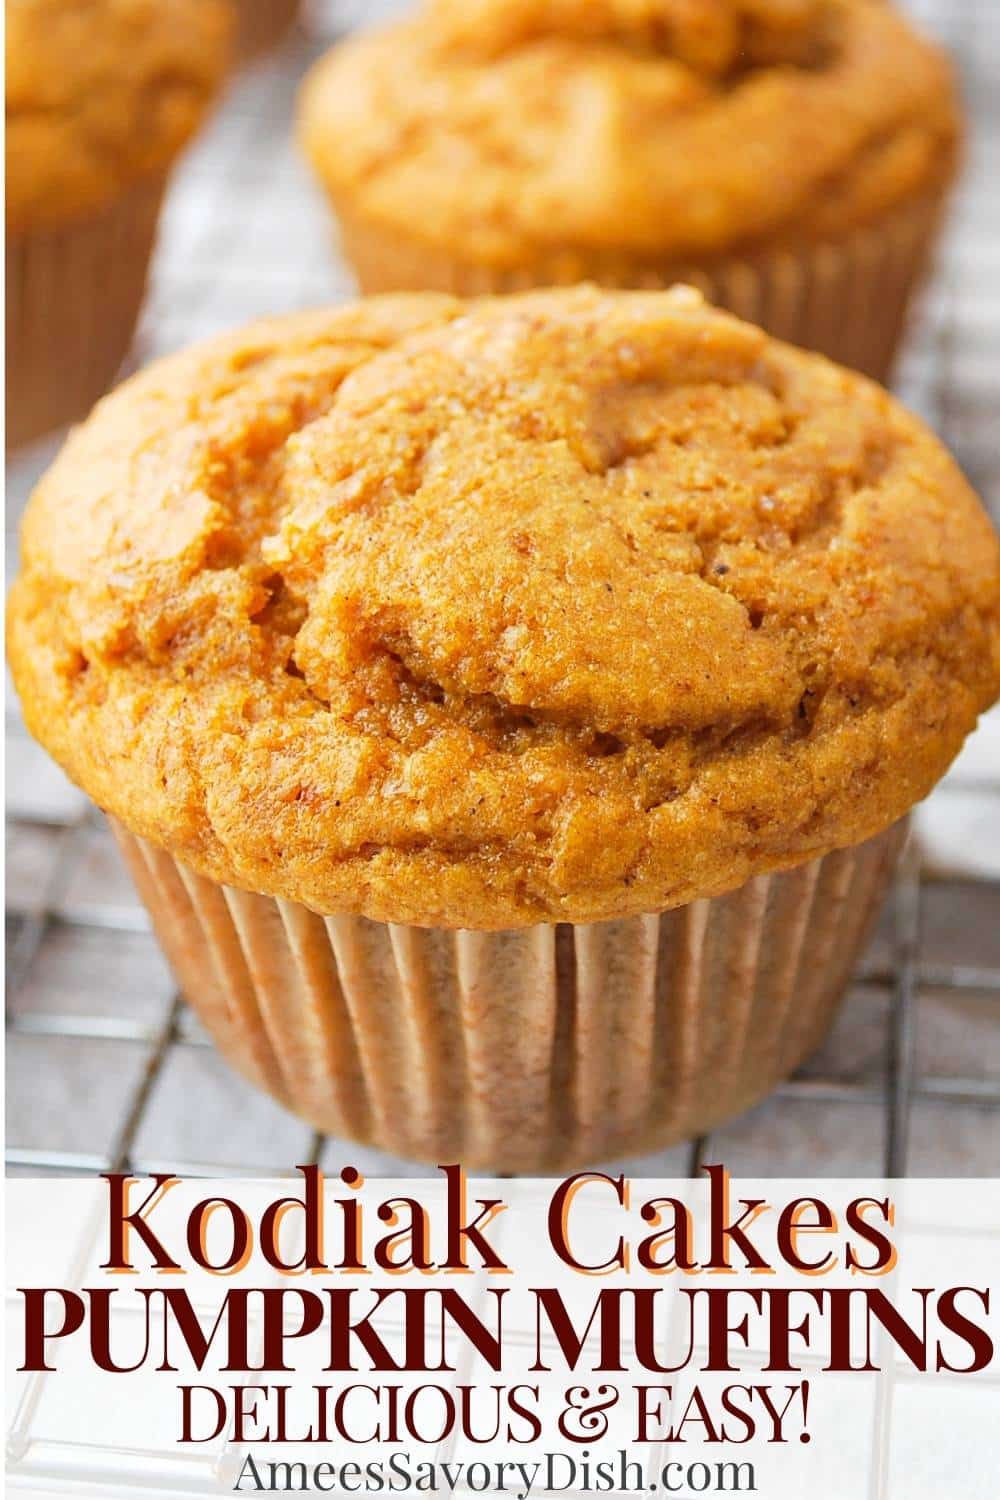 Healthy yet decadent cinnamon-spiced pumpkin muffins made with Kodiak Cakes mix, perfect for breakfast, snack, and dessert! via @Ameessavorydish